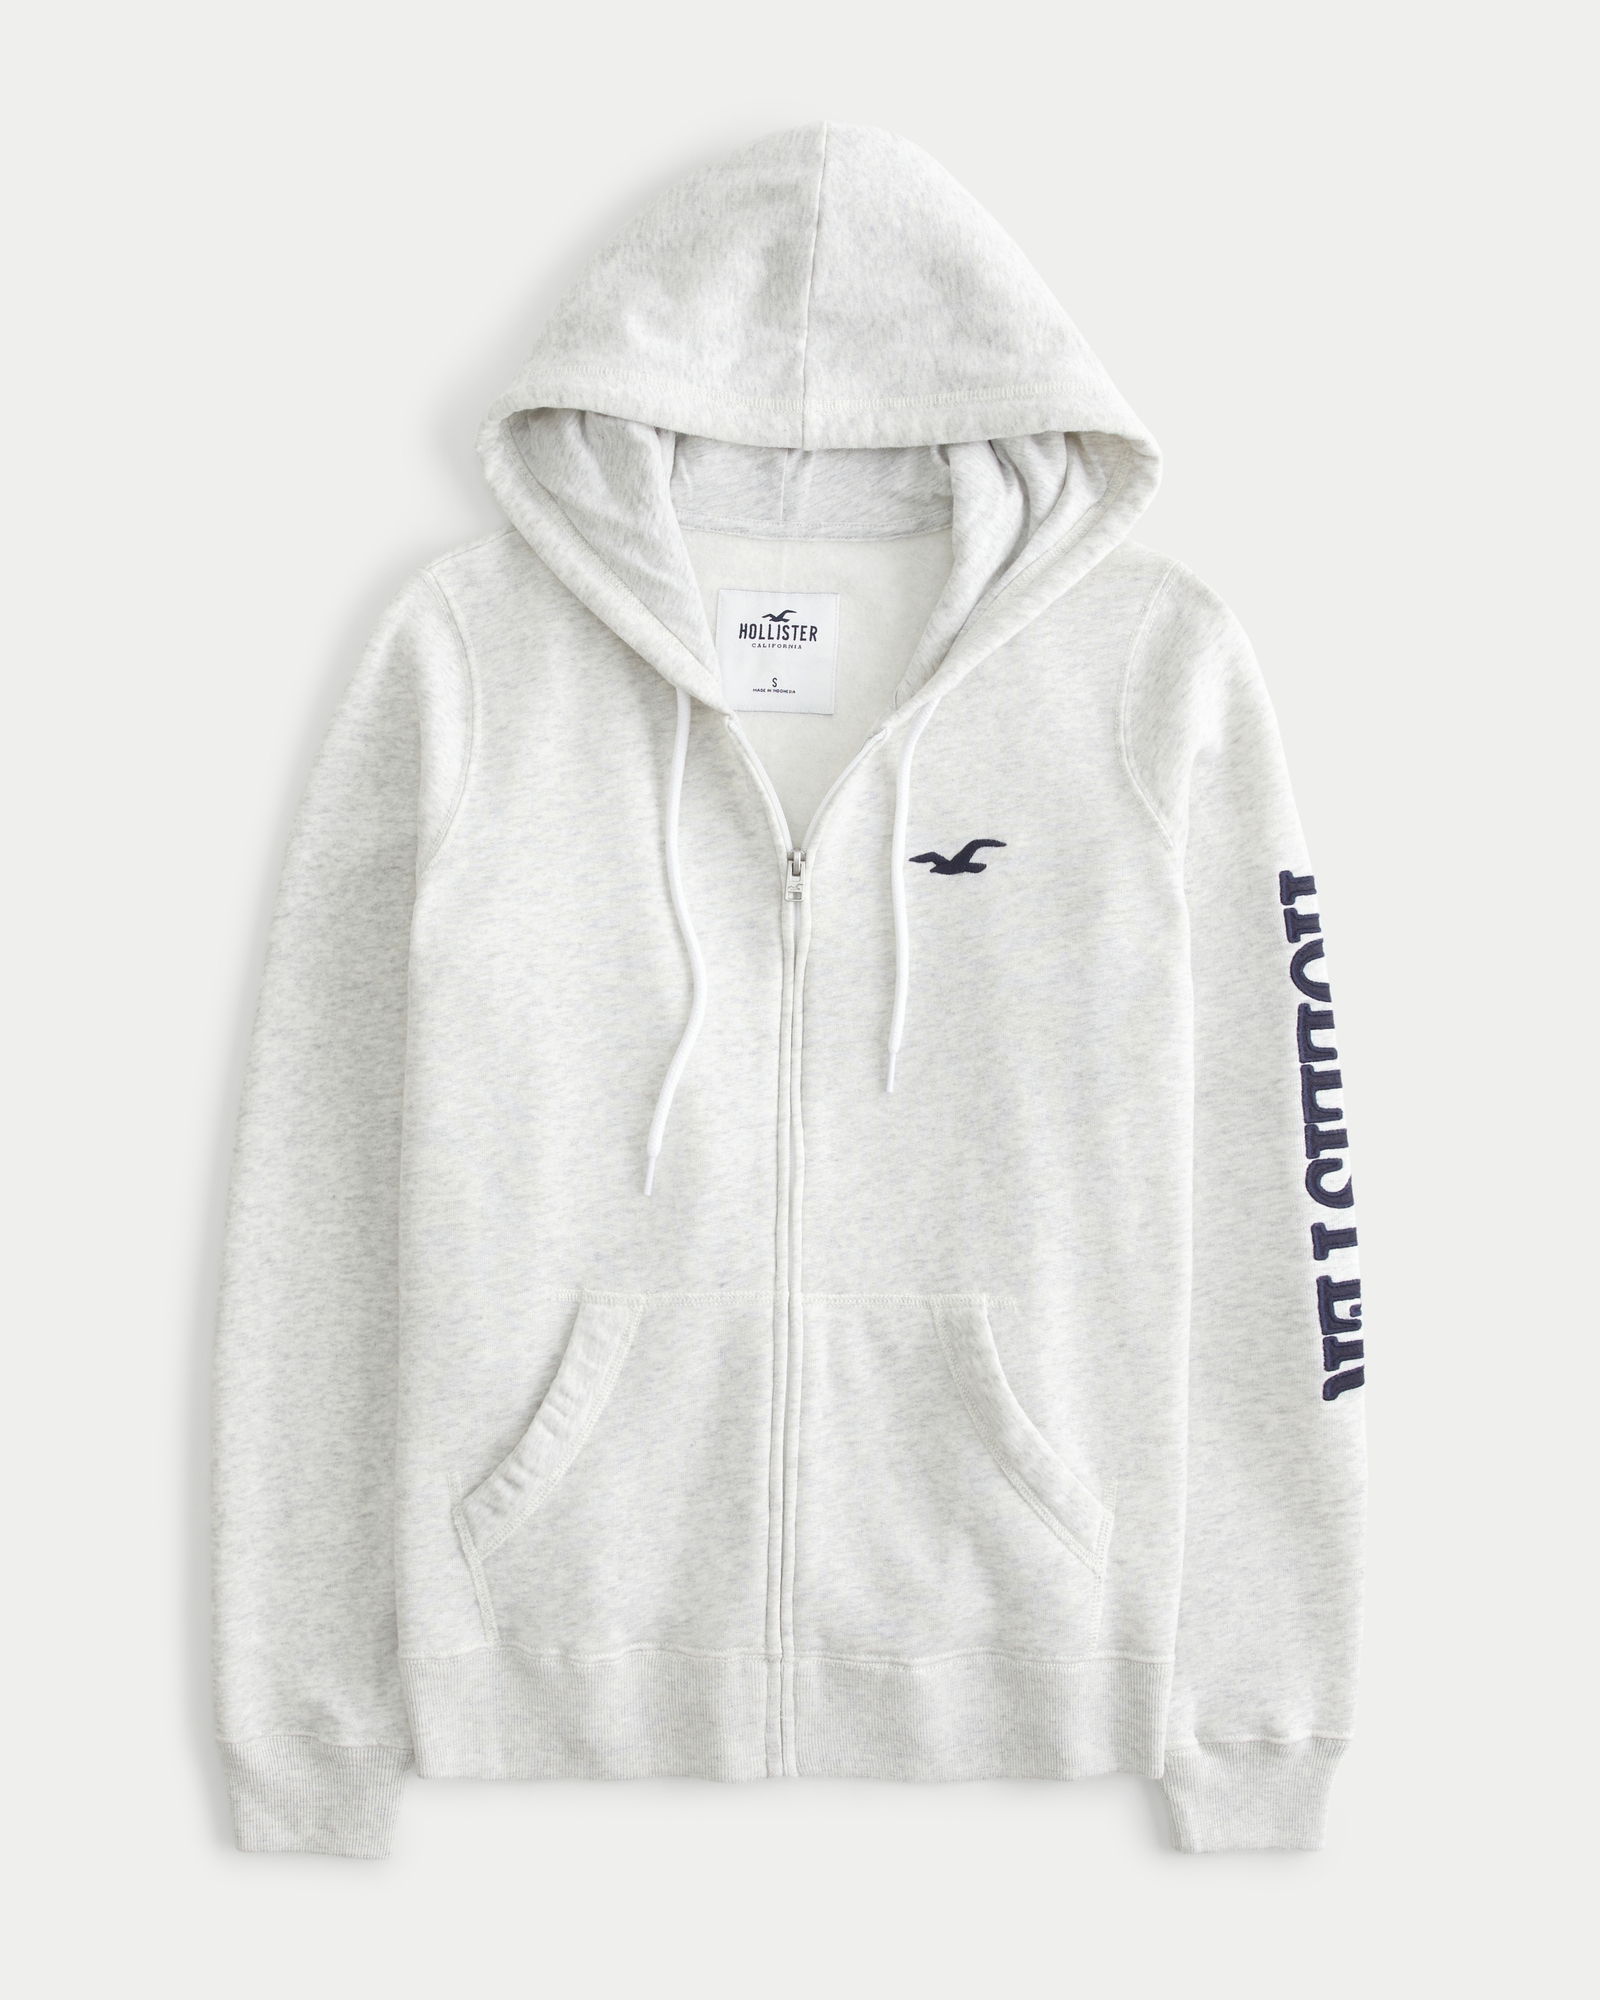 https://img.hollisterco.com/is/image/anf/KIC_352-3159-0007-112_prod1.jpg?policy=product-extra-large